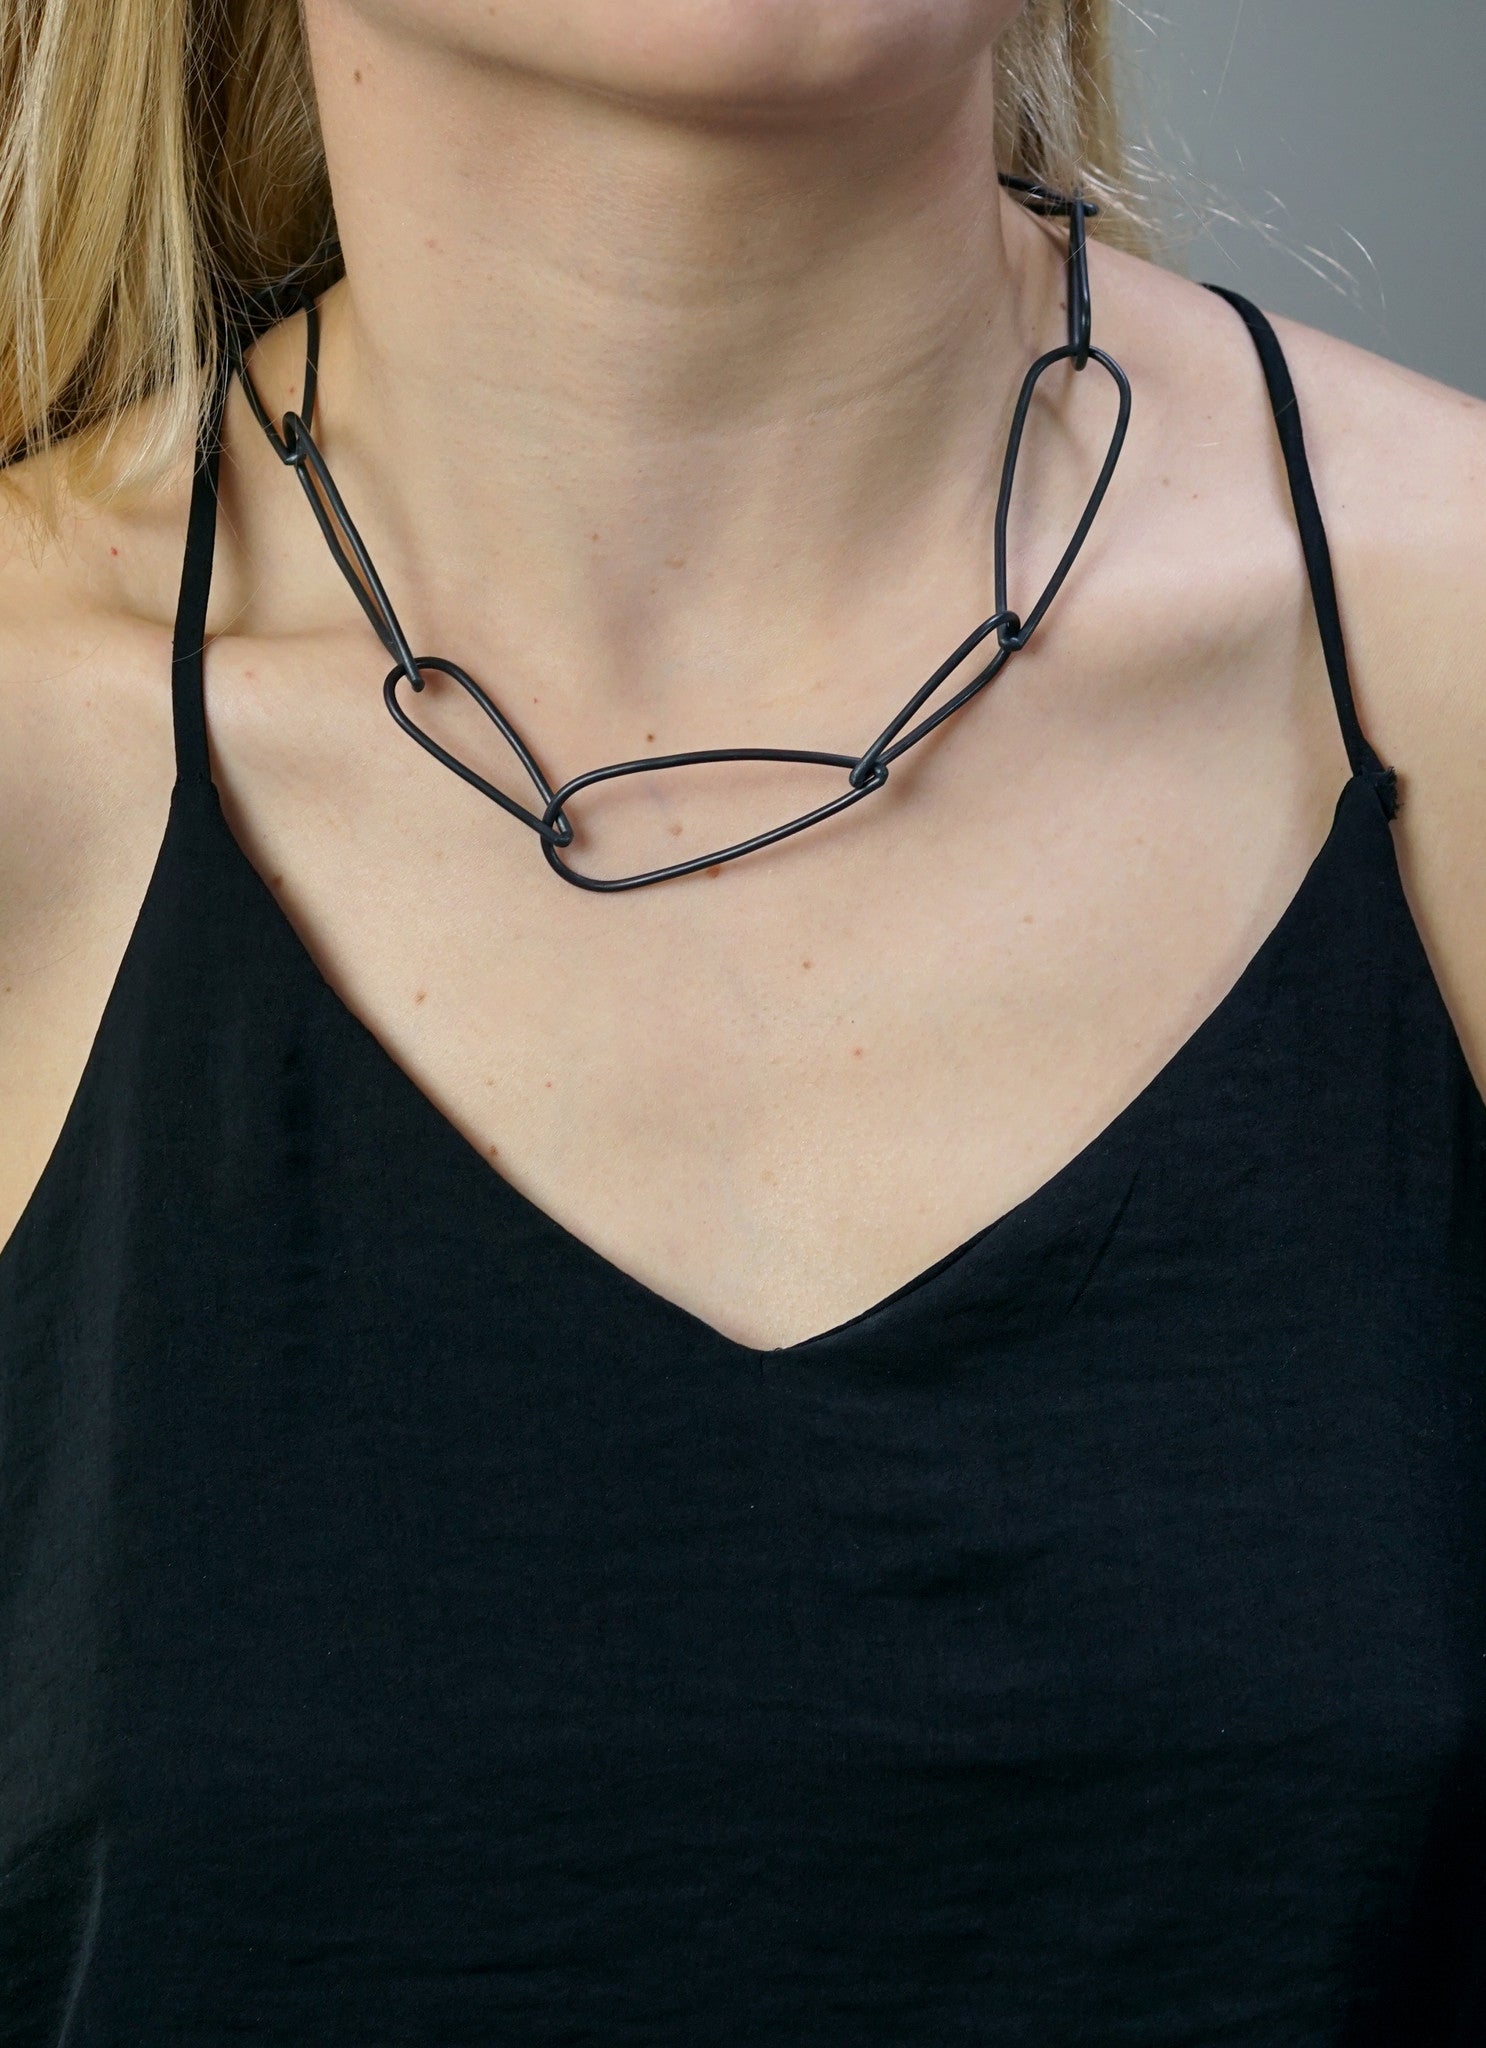 Modular Necklace No. 1 in steel